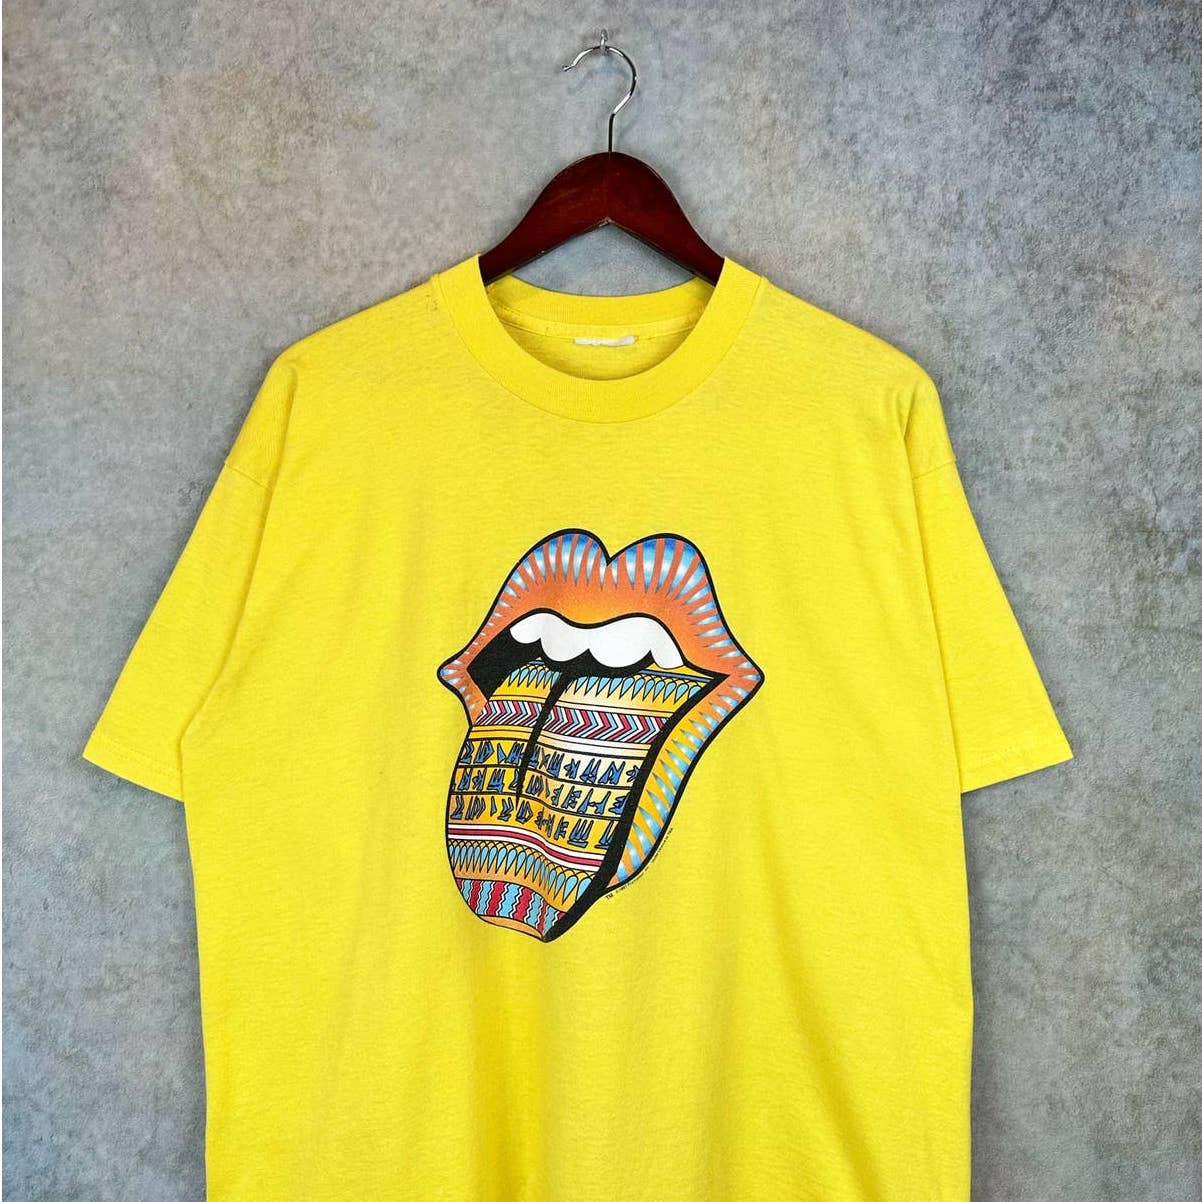 Vintage Rolling Stones Band T Shirt XL